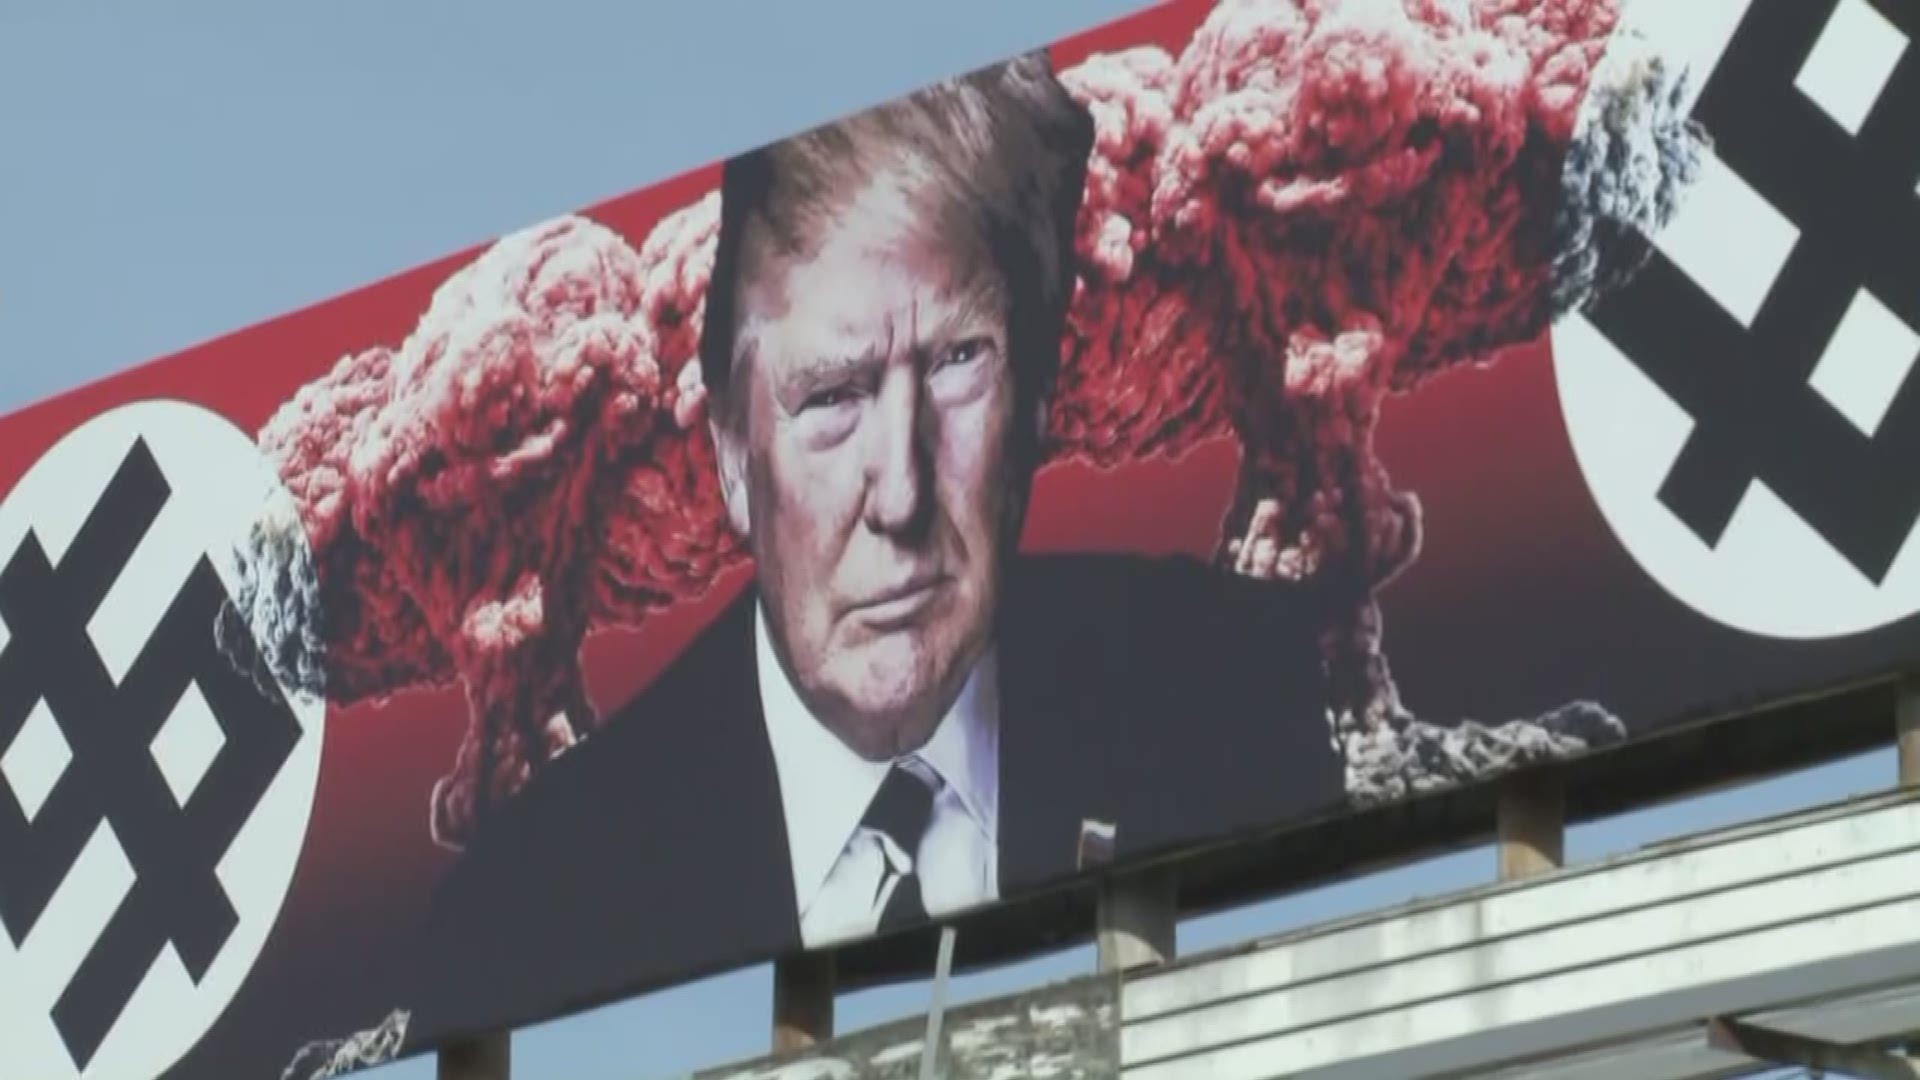 A President Trump billboard is near 11th and Grand Avenue, sparking controversy.